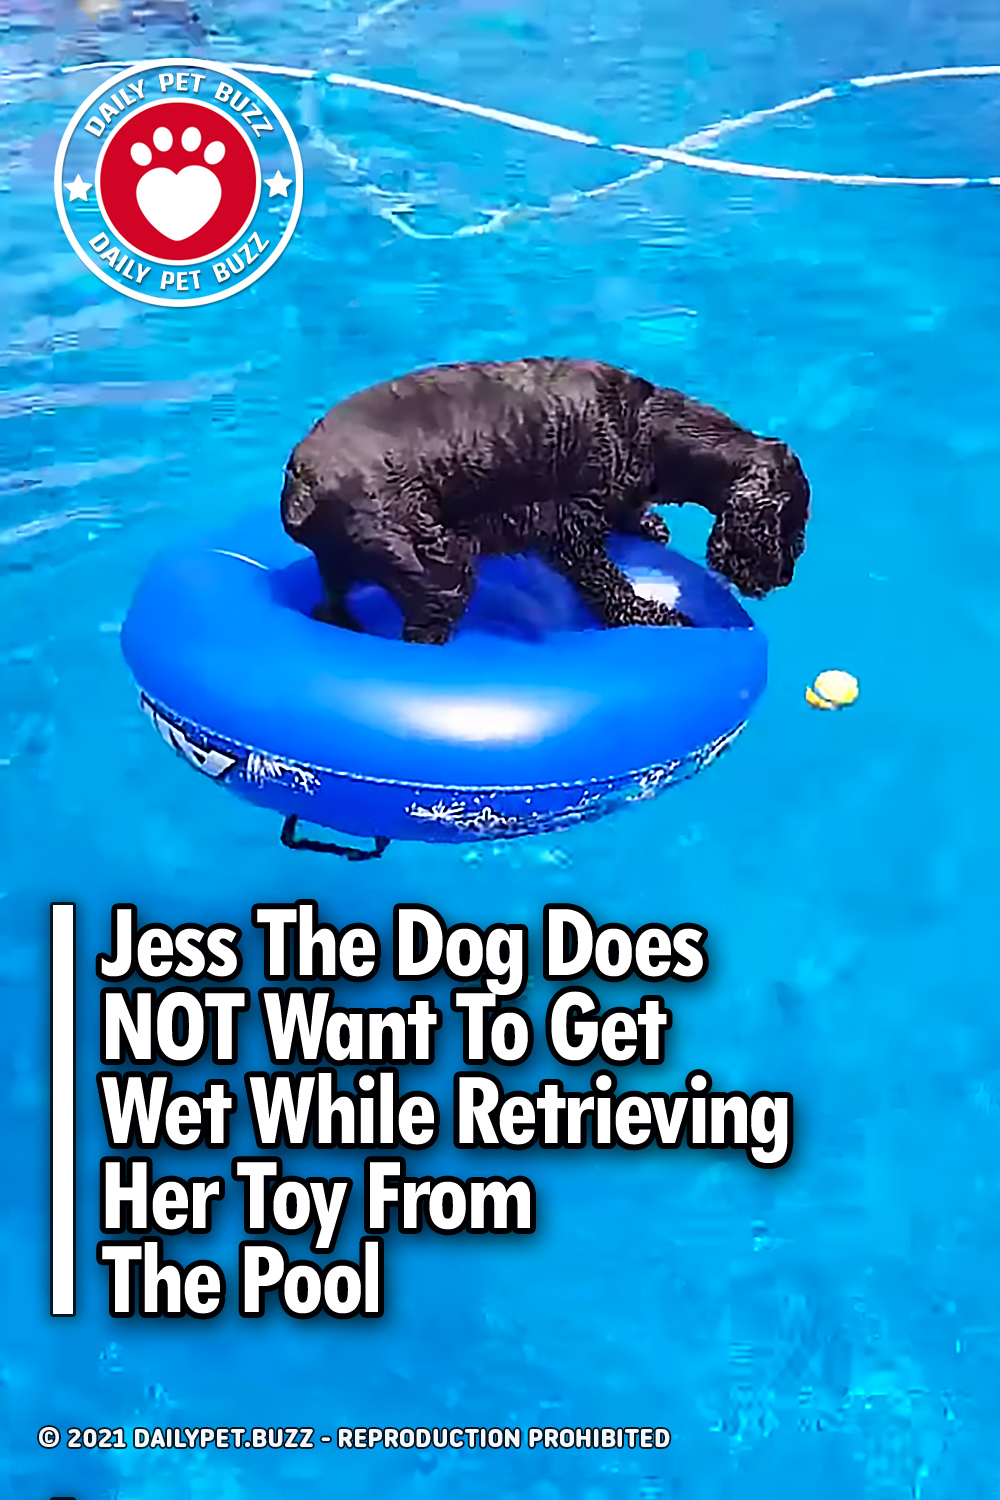 Jess The Dog Does NOT Want To Get Wet While Retrieving Her Toy From The Pool